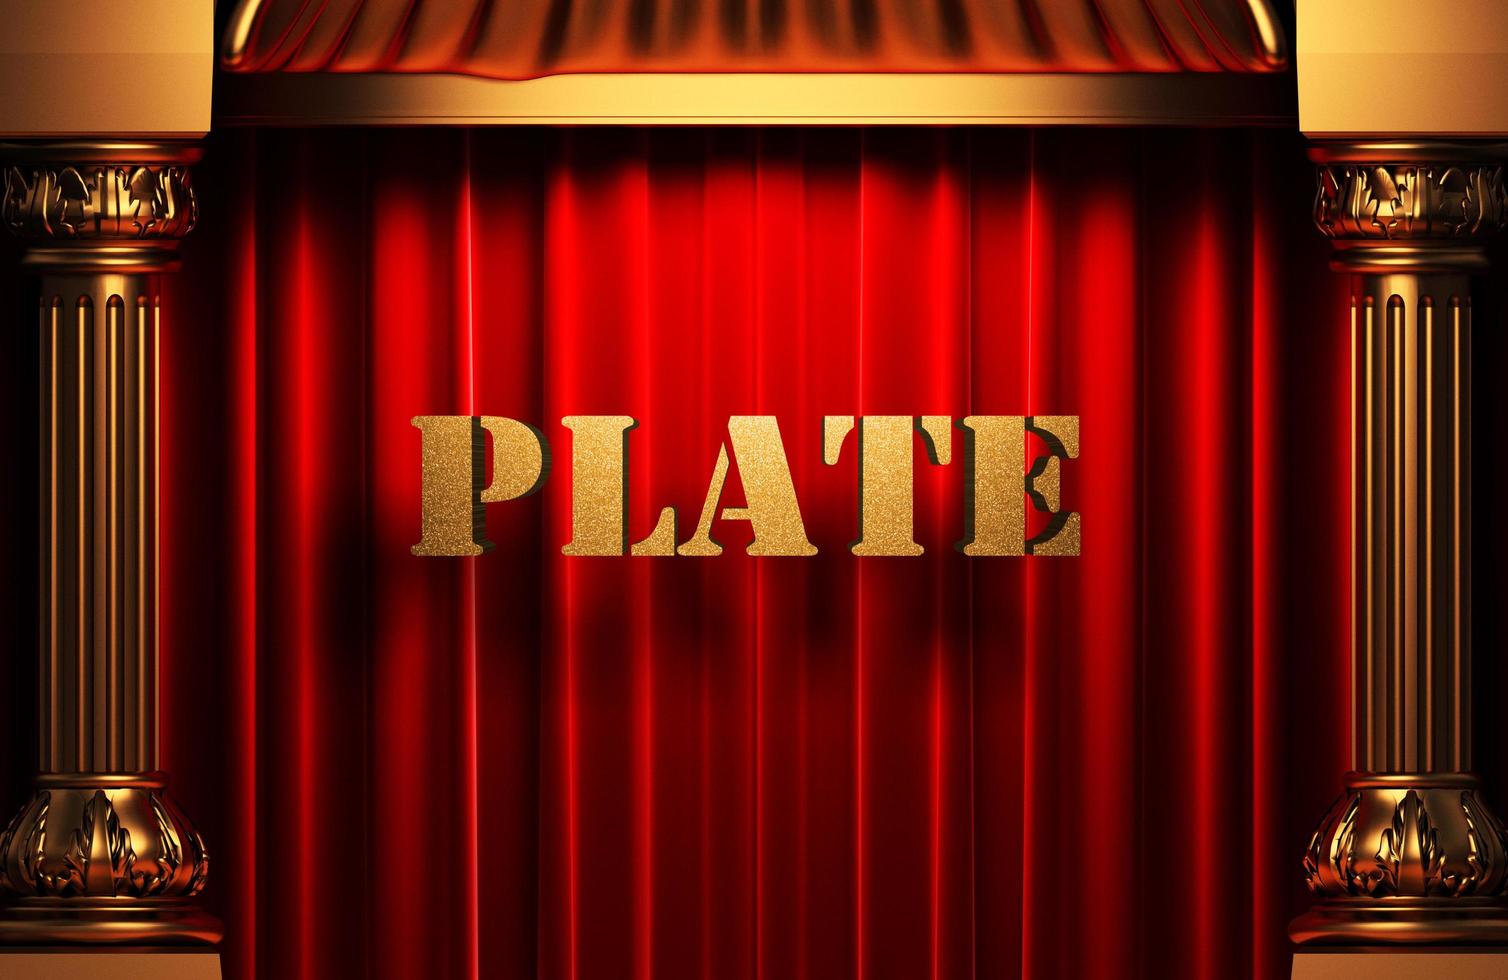 plate golden word on red curtain photo